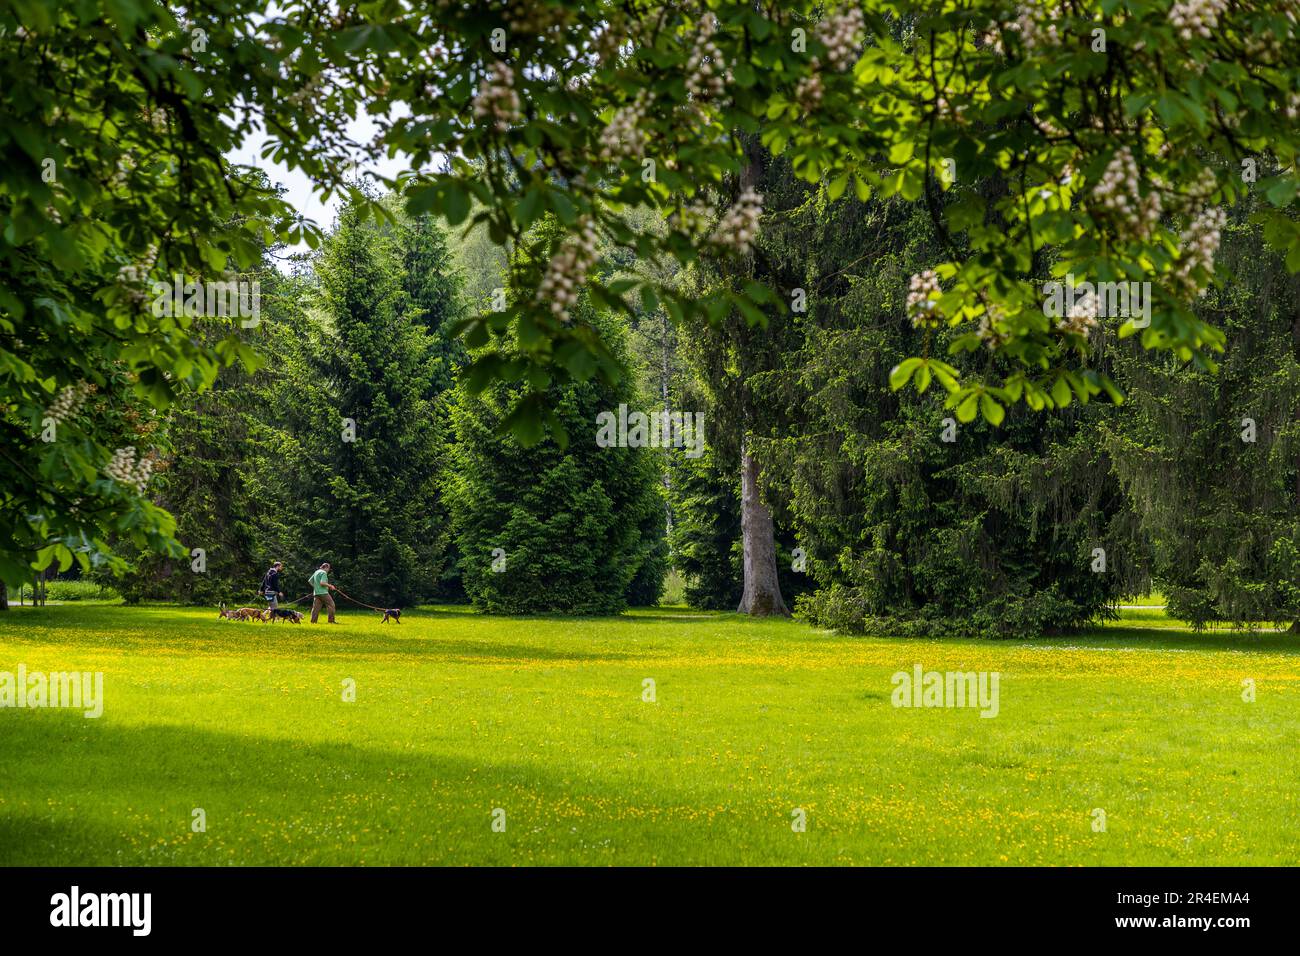 Dogs in the park of Hellbrunn Palace in Salzburg, Austria Stock Photo